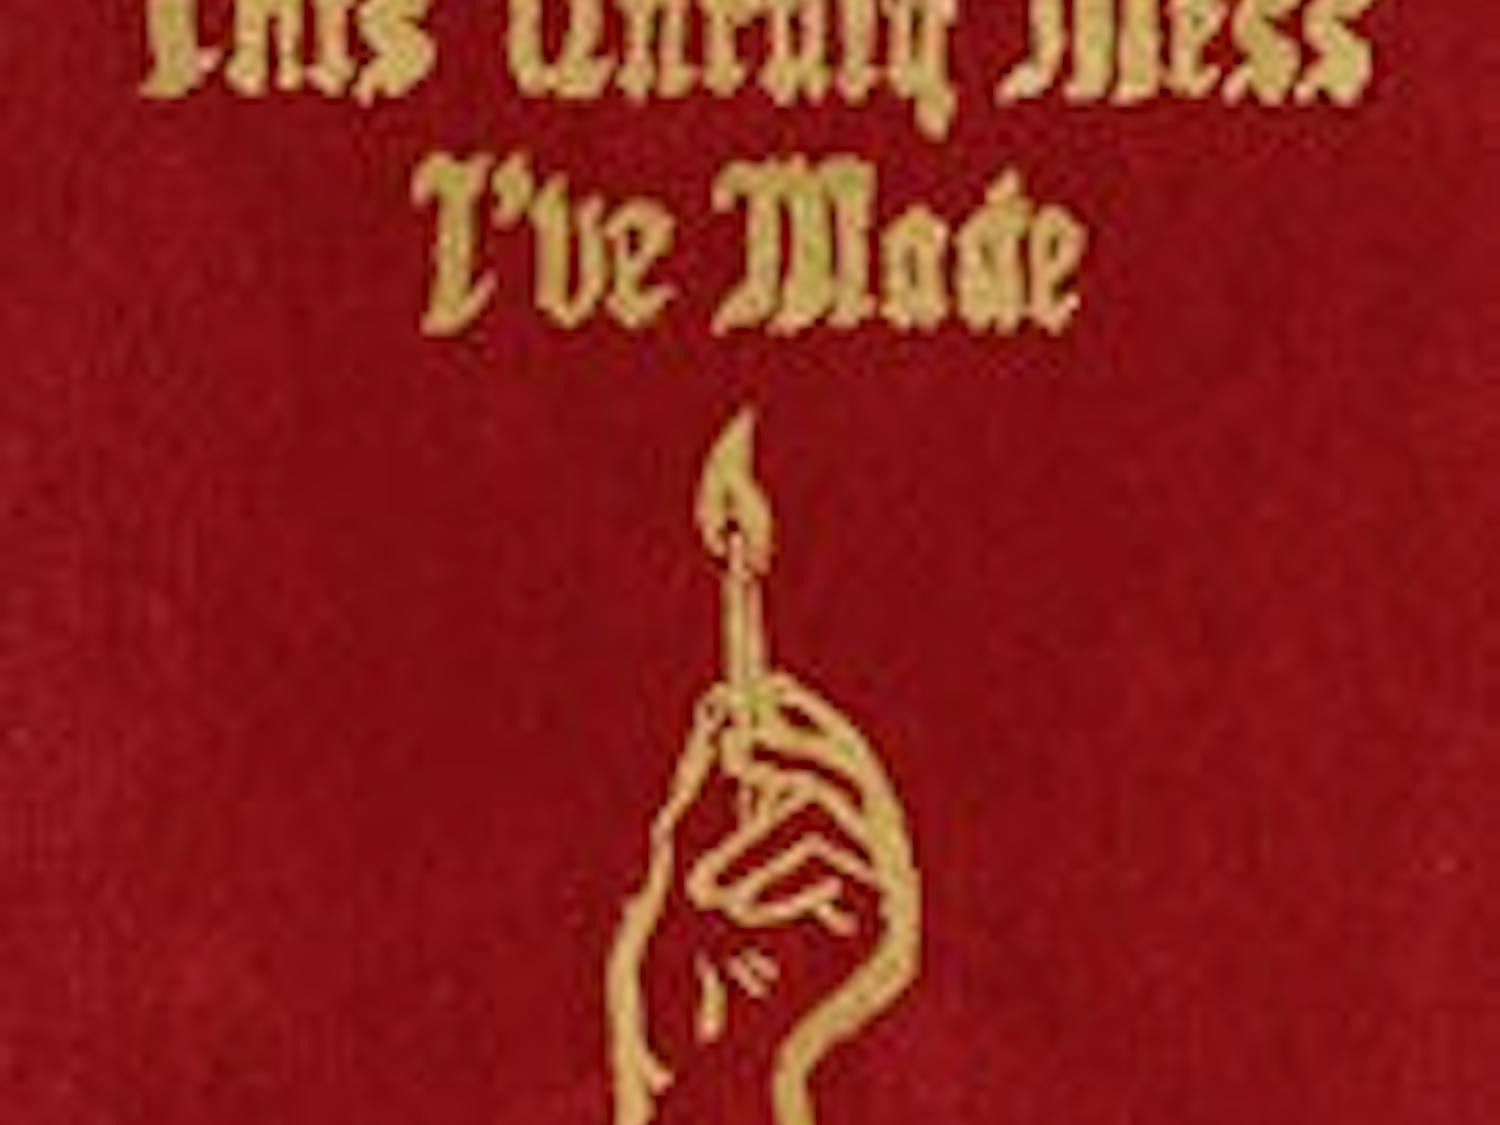 Macklemore and Ryan Lewis's newest album "This Unruly Mess I've Made" released on Feb. 26 and offers a unique combination of dance songs as well as ones reflecting the harsher realities of life.